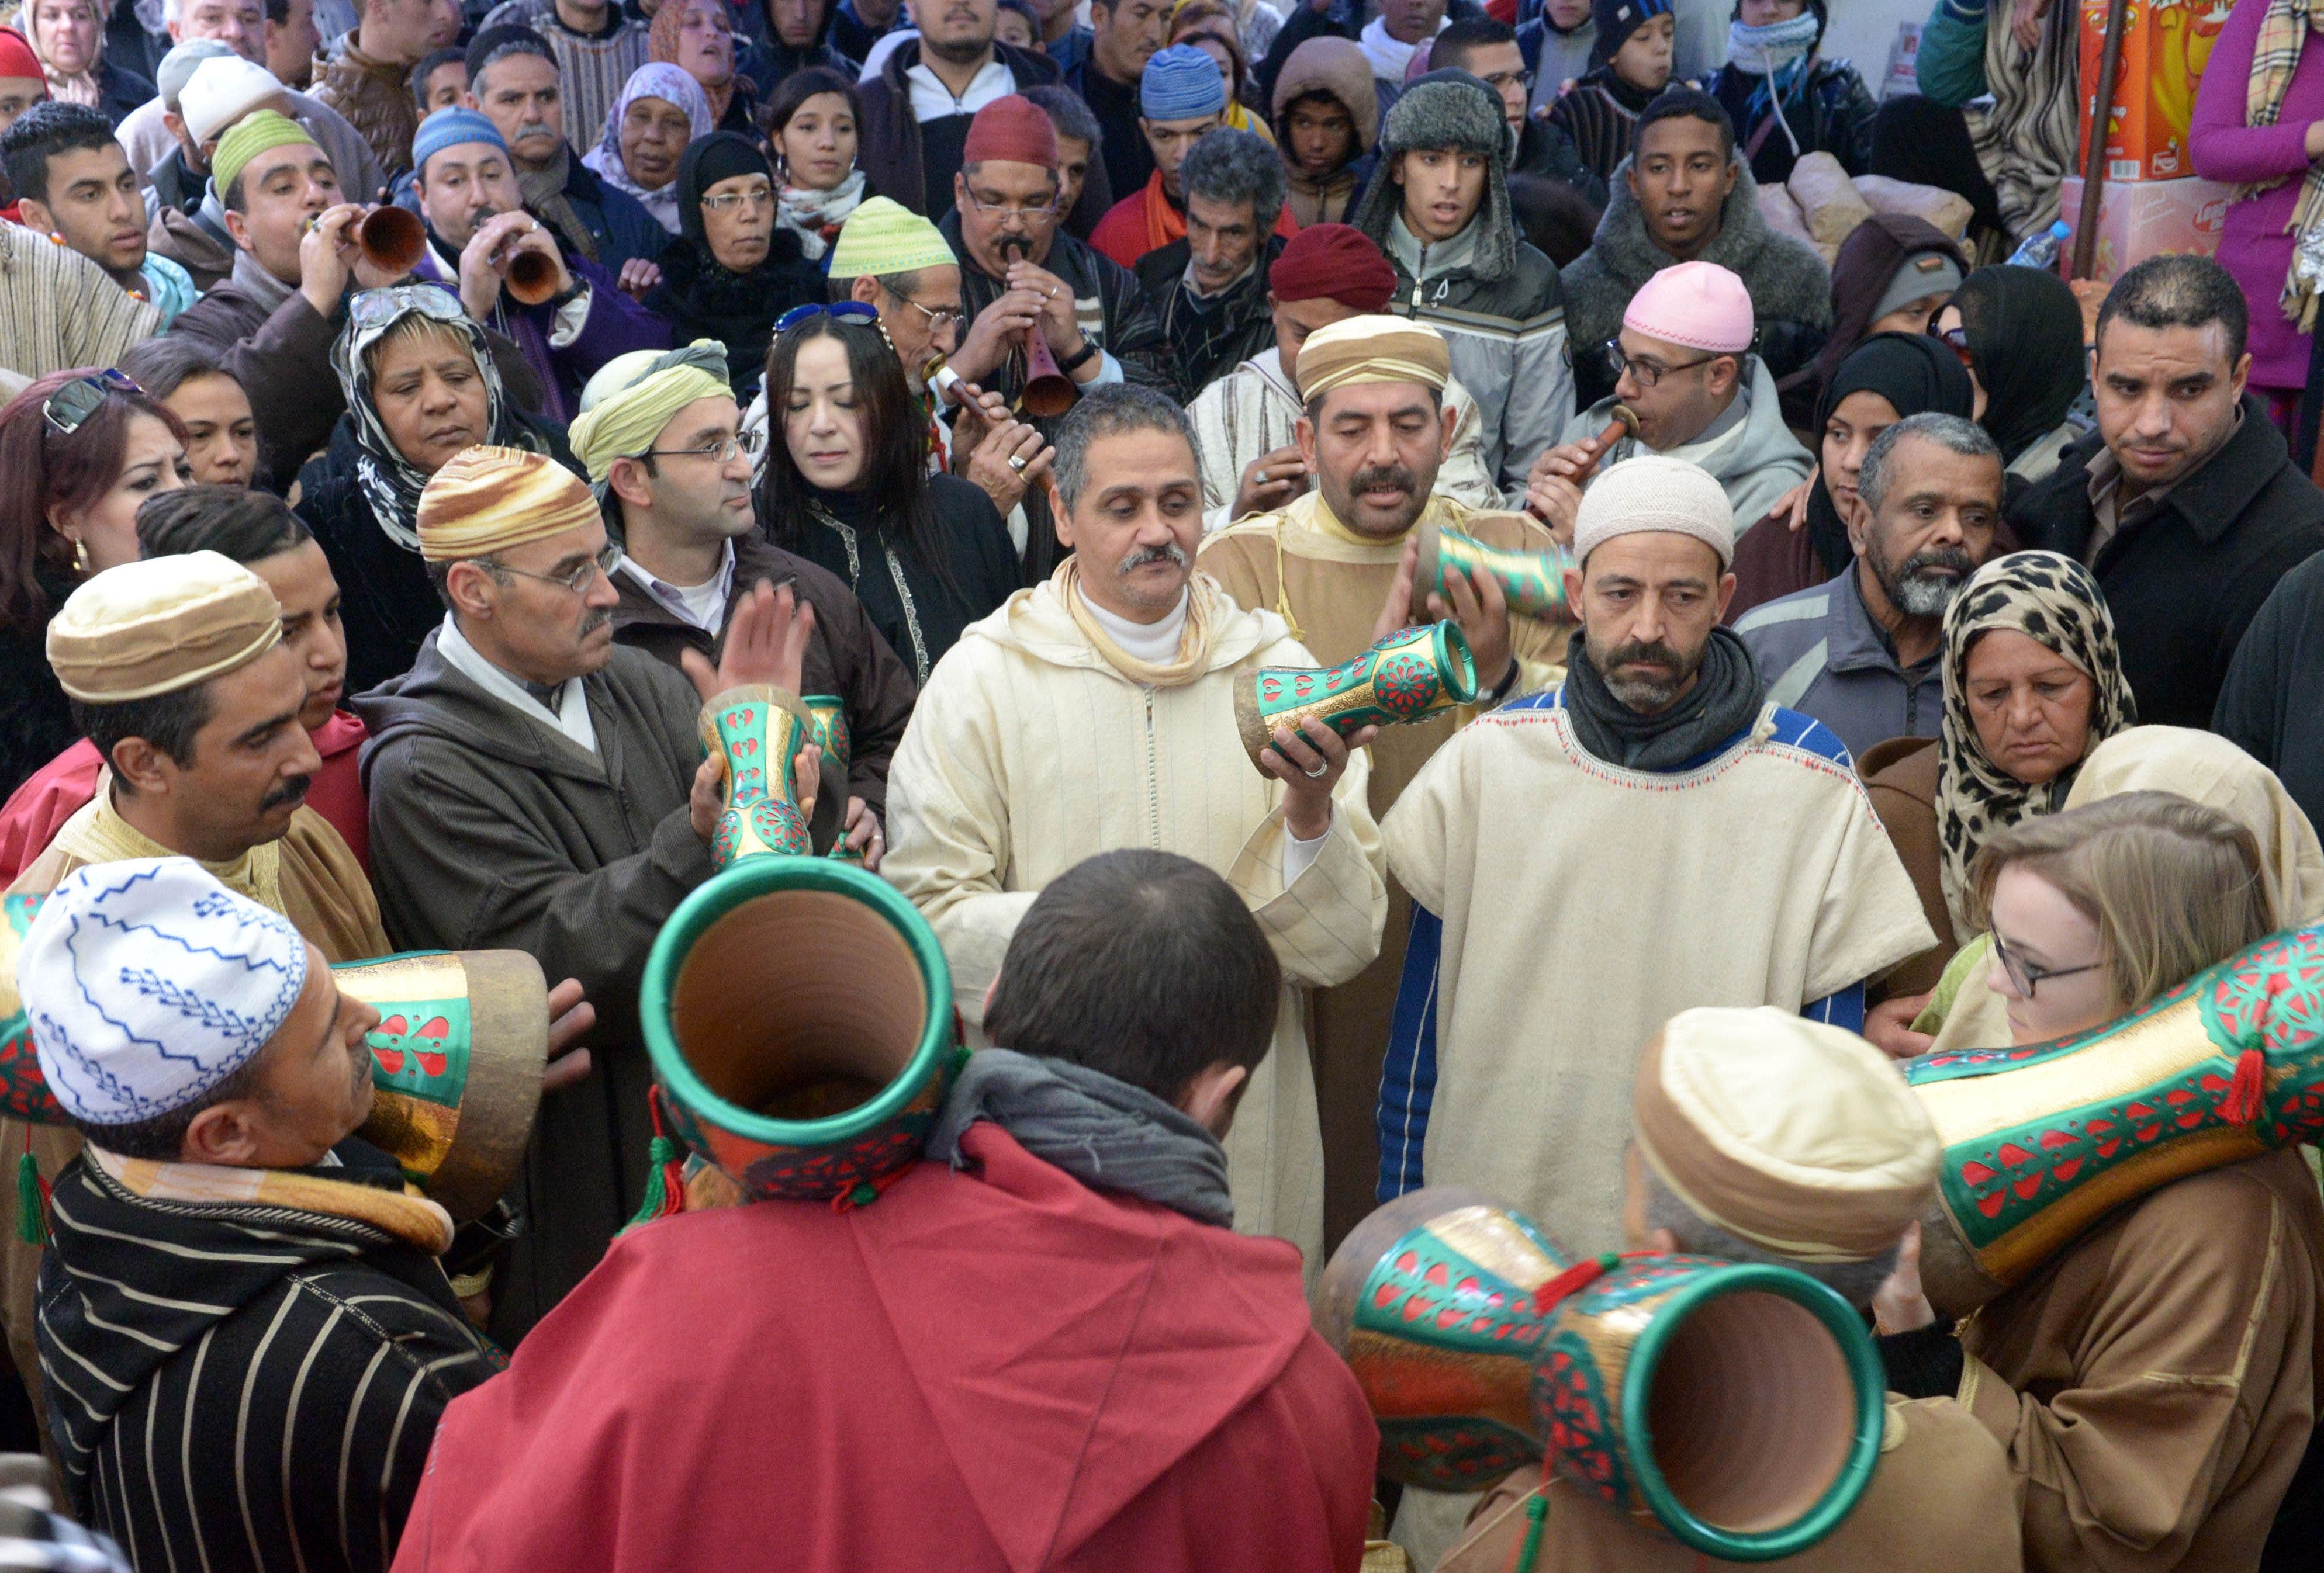 Sorcery and spirits at Morocco Sufi festival